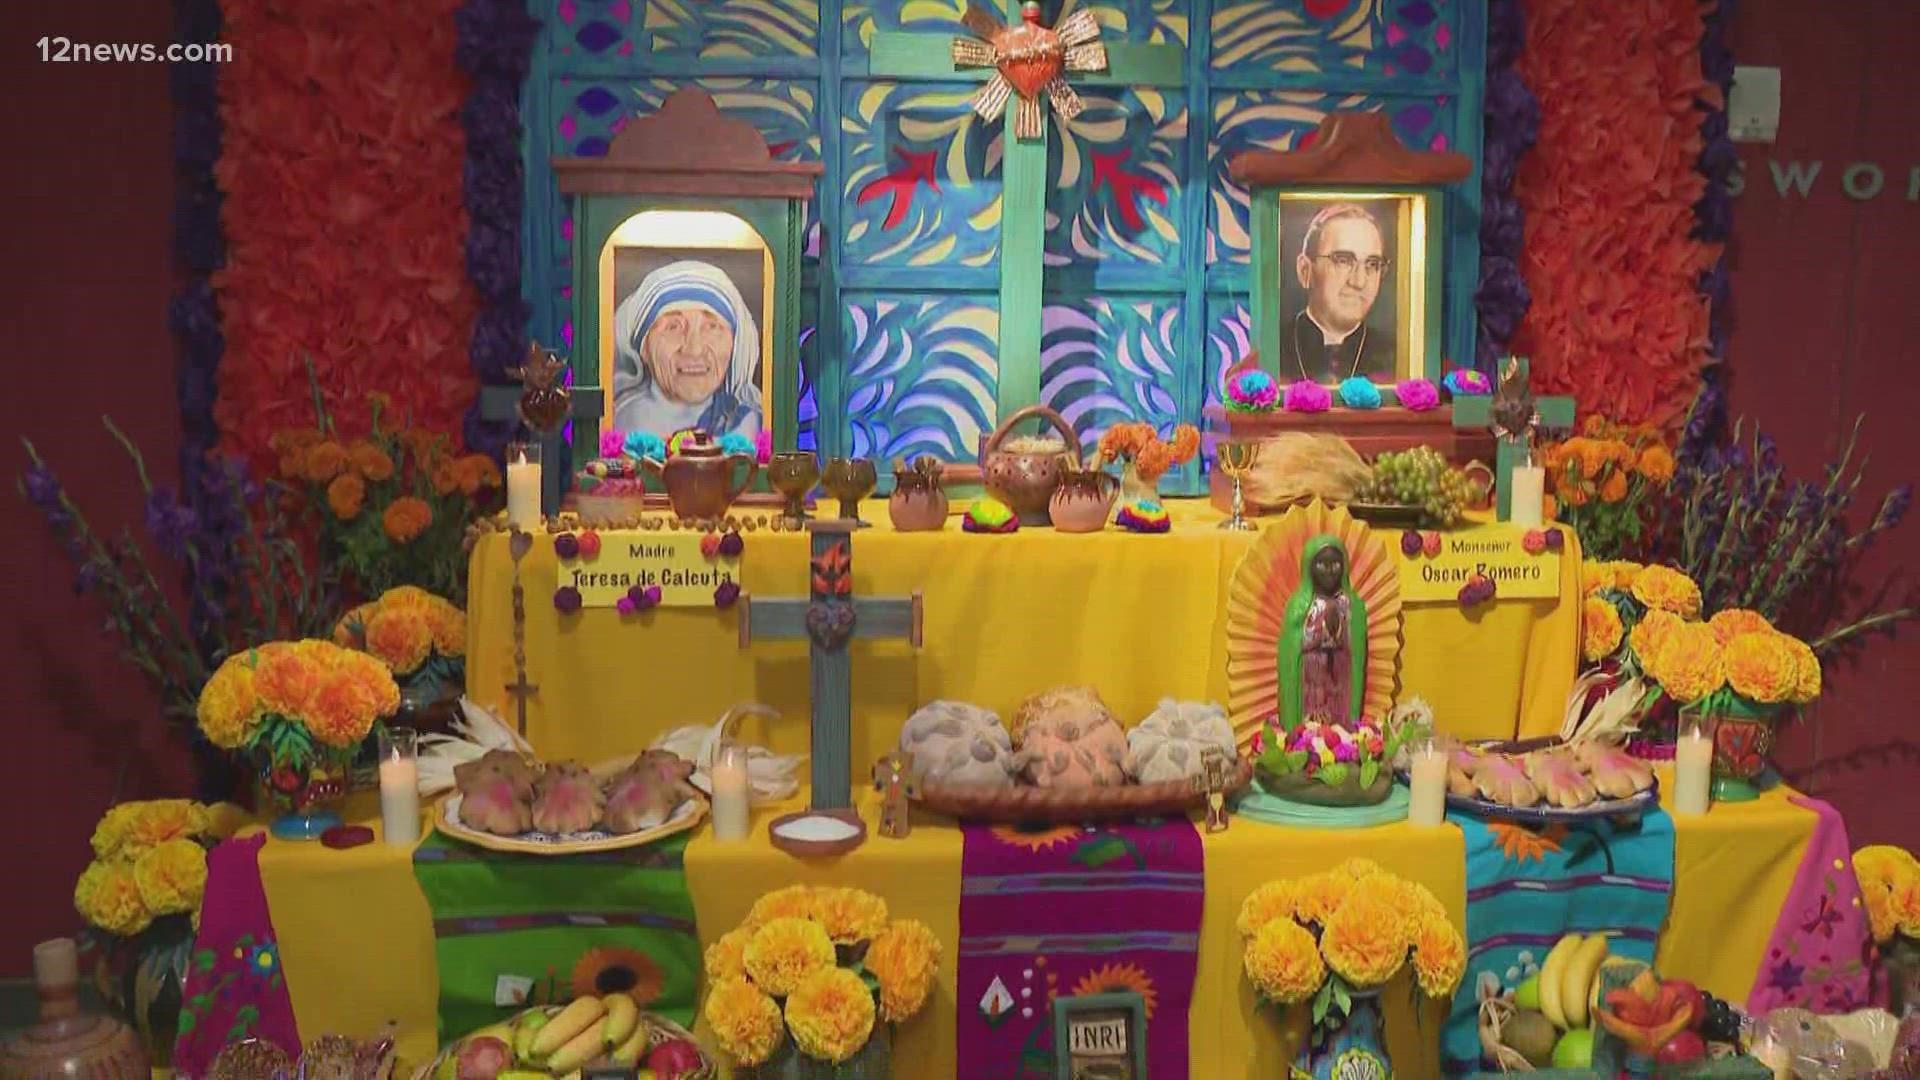 The ofrenda is a historic Mexican tradition used in the celebration to honor and remember ancestors. A beautiful ofrenda is now on display at the Mesa Arts Center.